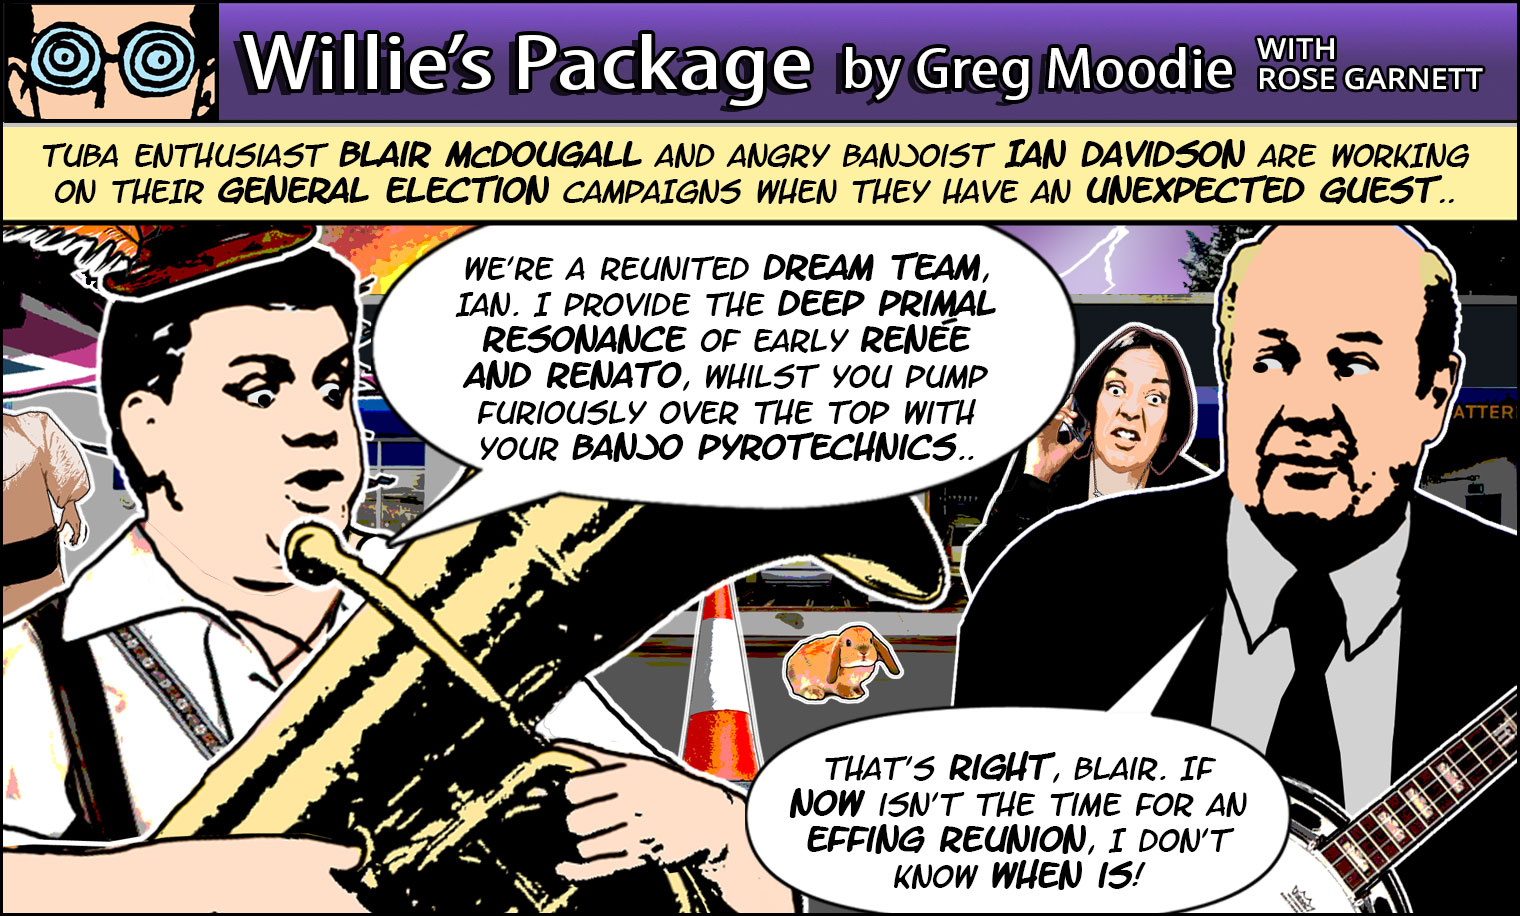 Willie's Package